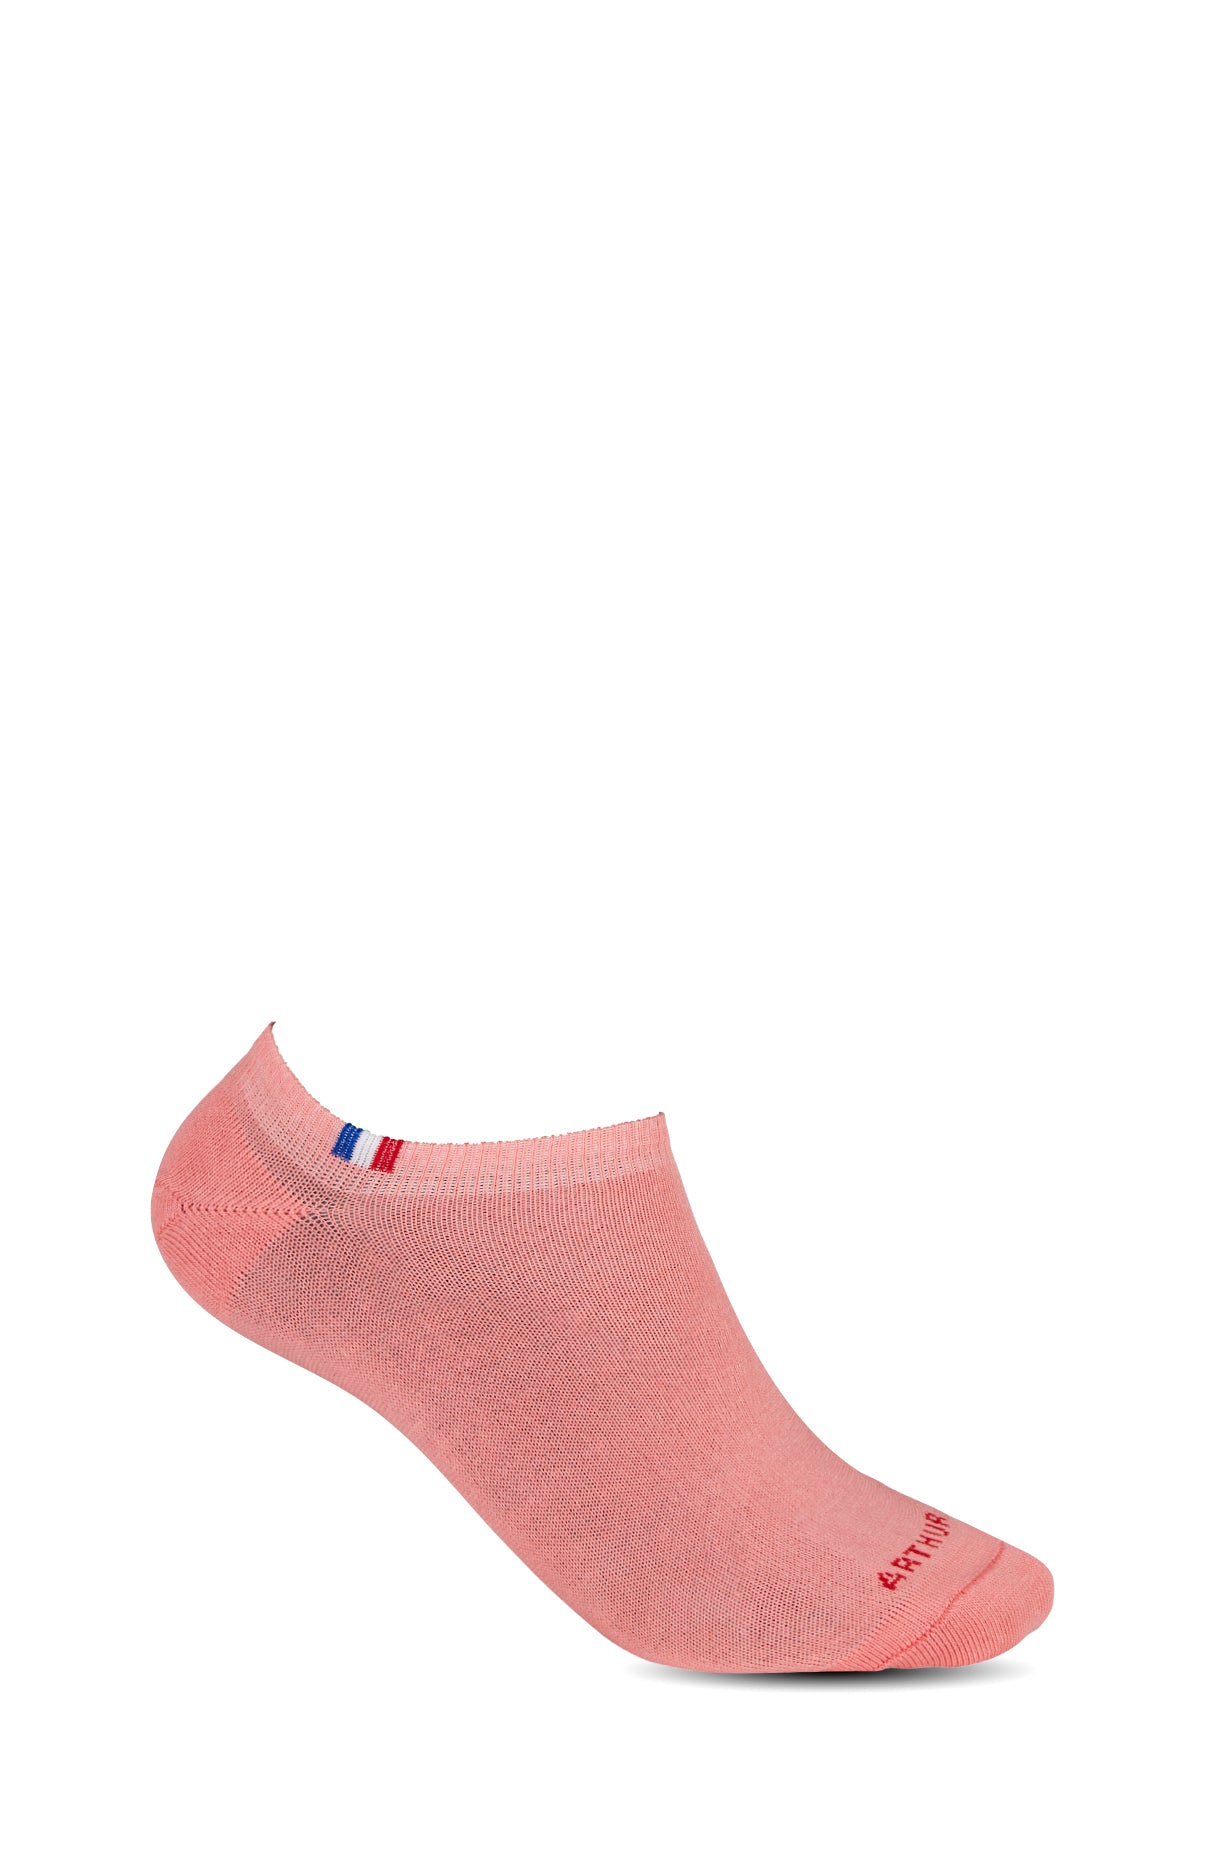 Pack 2 chaussettes invisibles mint 36/40